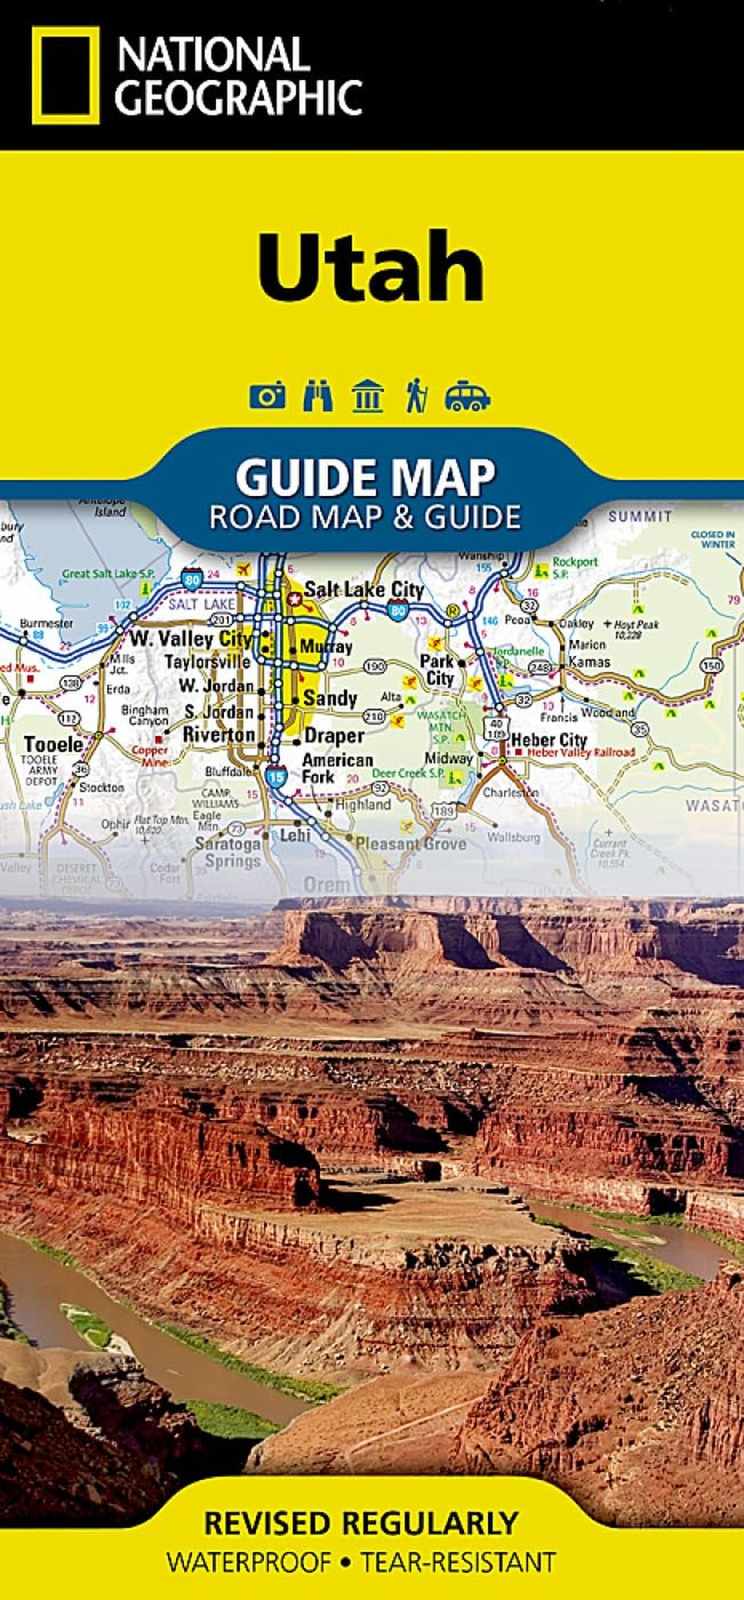 Utah Map (National Geographic Guide Map) - NEW